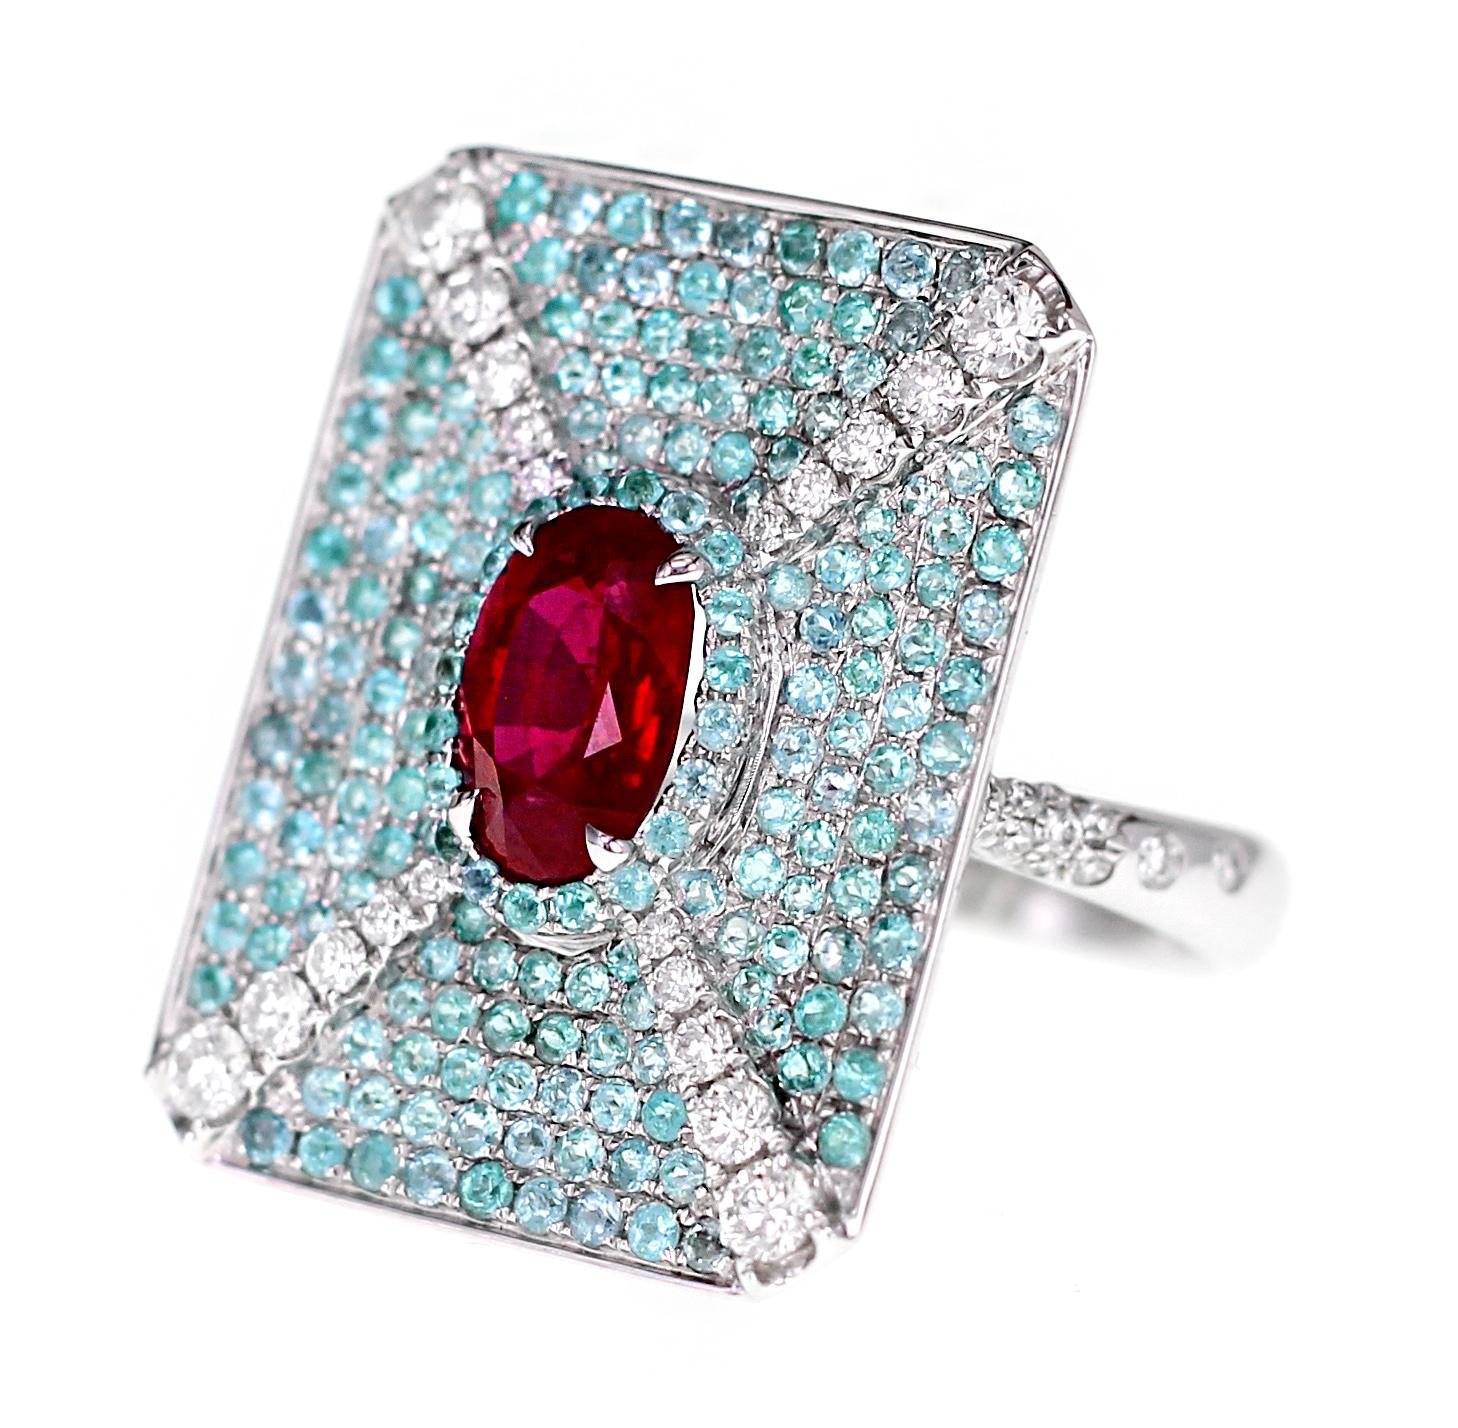 Made in 18 K gold, a lovely combination of GRS certified vivid red pigeon blood color ruby with Brazilian Paraiba are set in this wonderful ring. The ruby is from Madagascar as stated in the certificate. Along with the ruby & Paraiba, 0.61 carat of